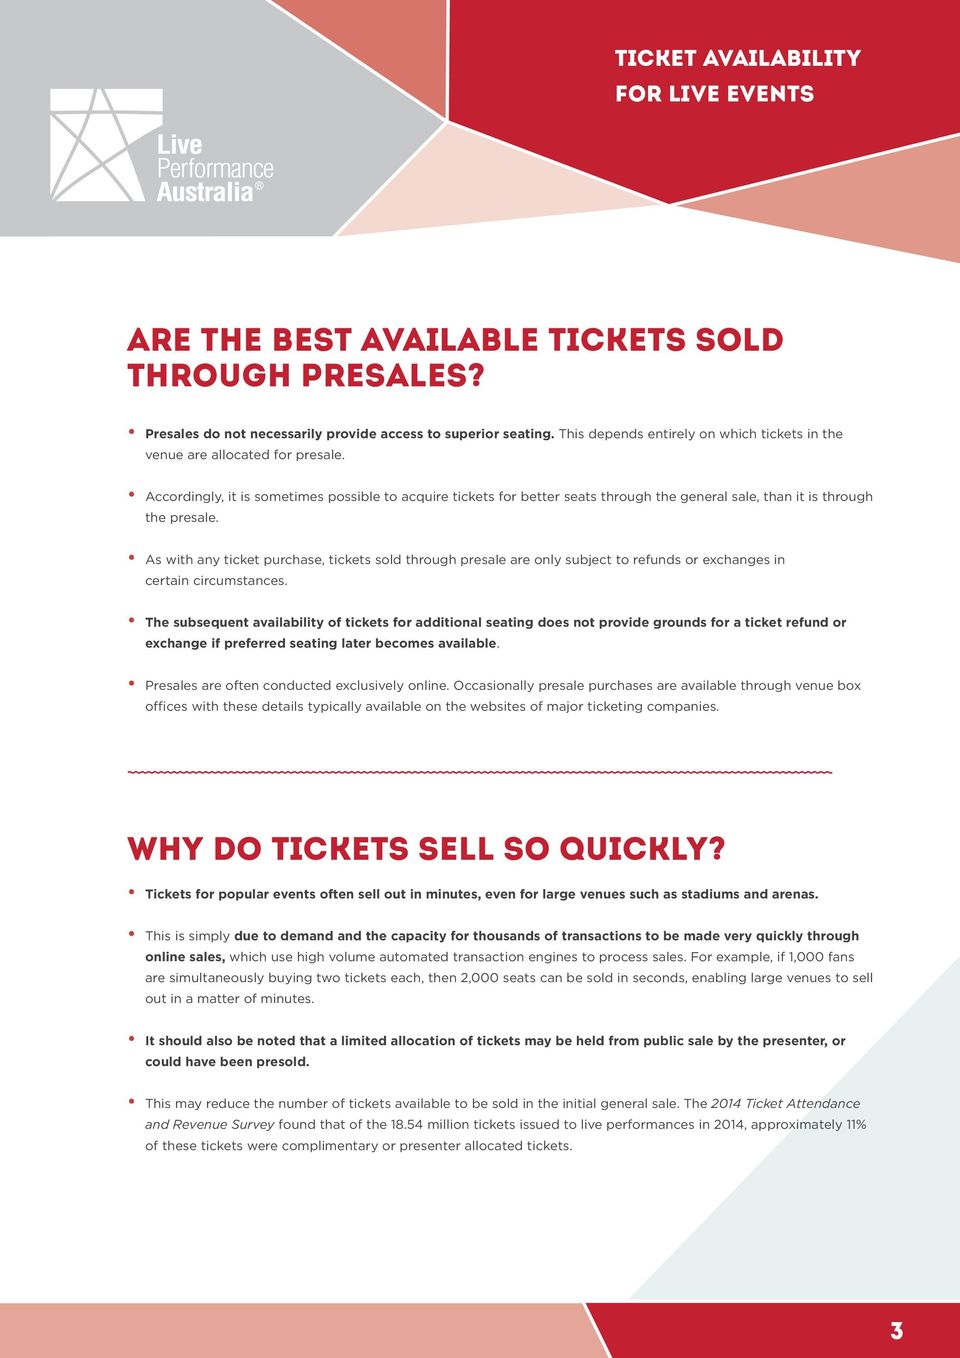 As with any ticket purchase, tickets sold through presale are only subject to refunds or exchanges in certain circumstances.